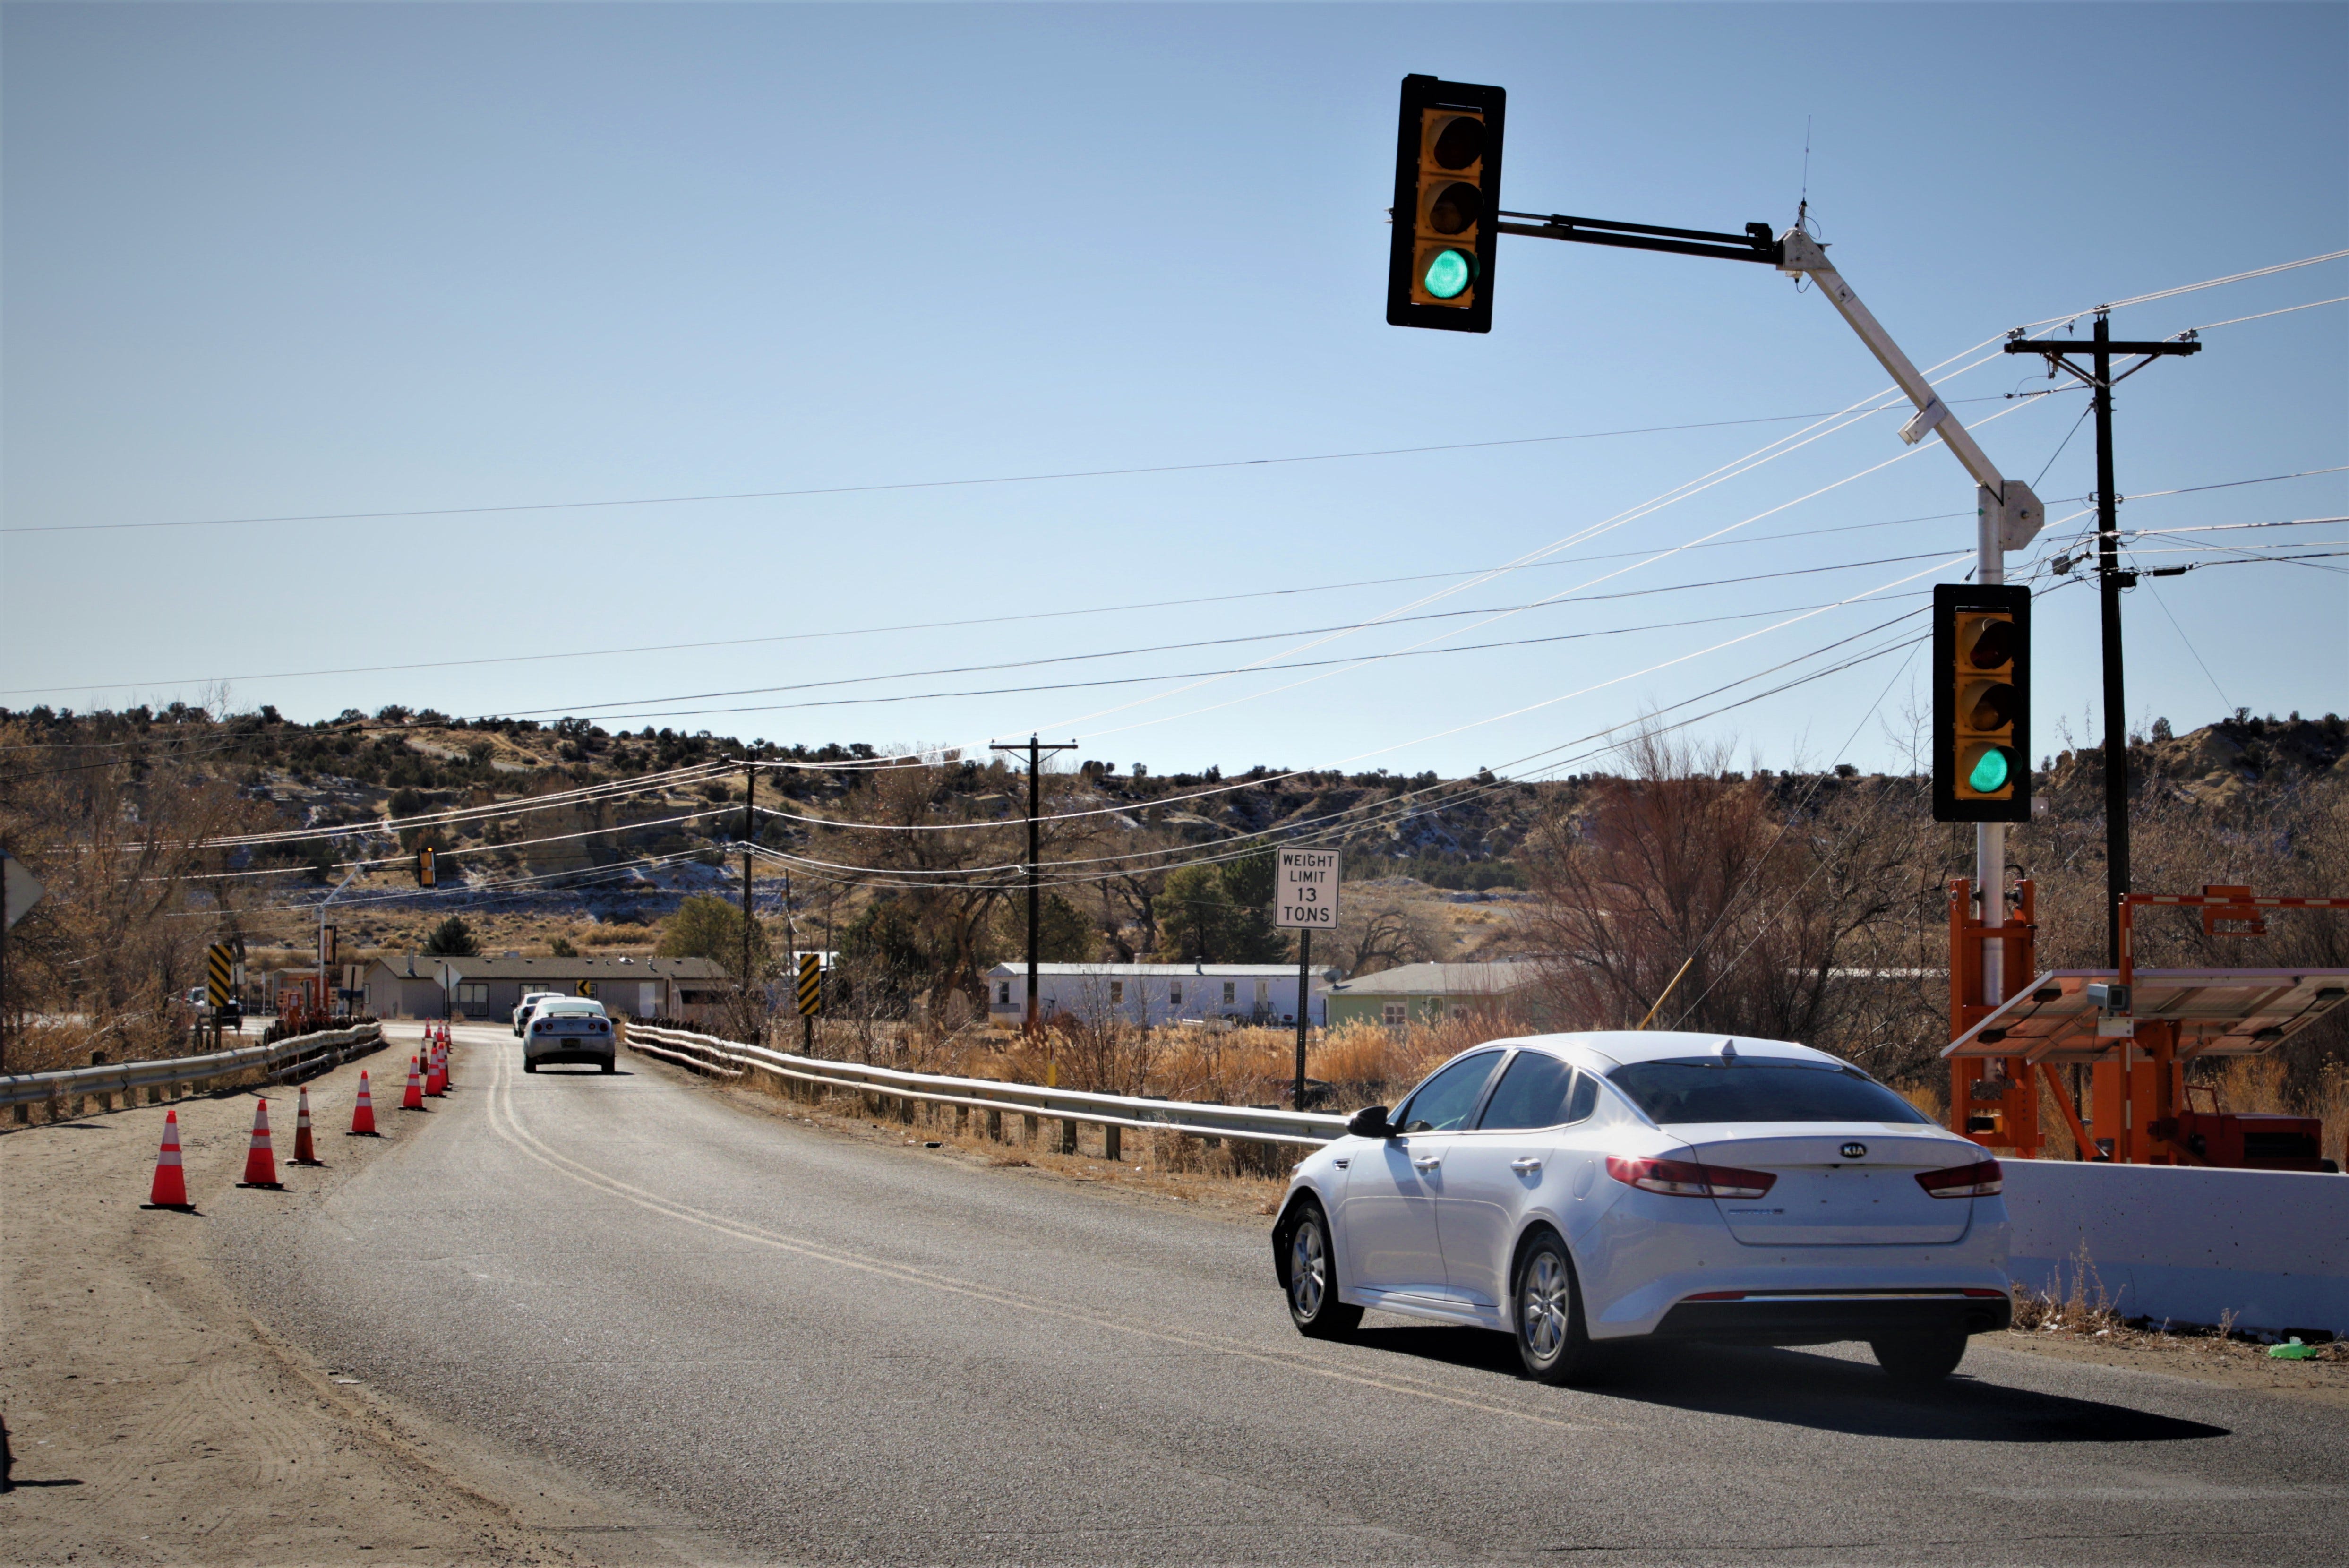 A long-delayed project to build a new bridge over the San Juan River on County Road 5500 could become a reality soon if San Juan County commissioners award a construction contract for the work this week.